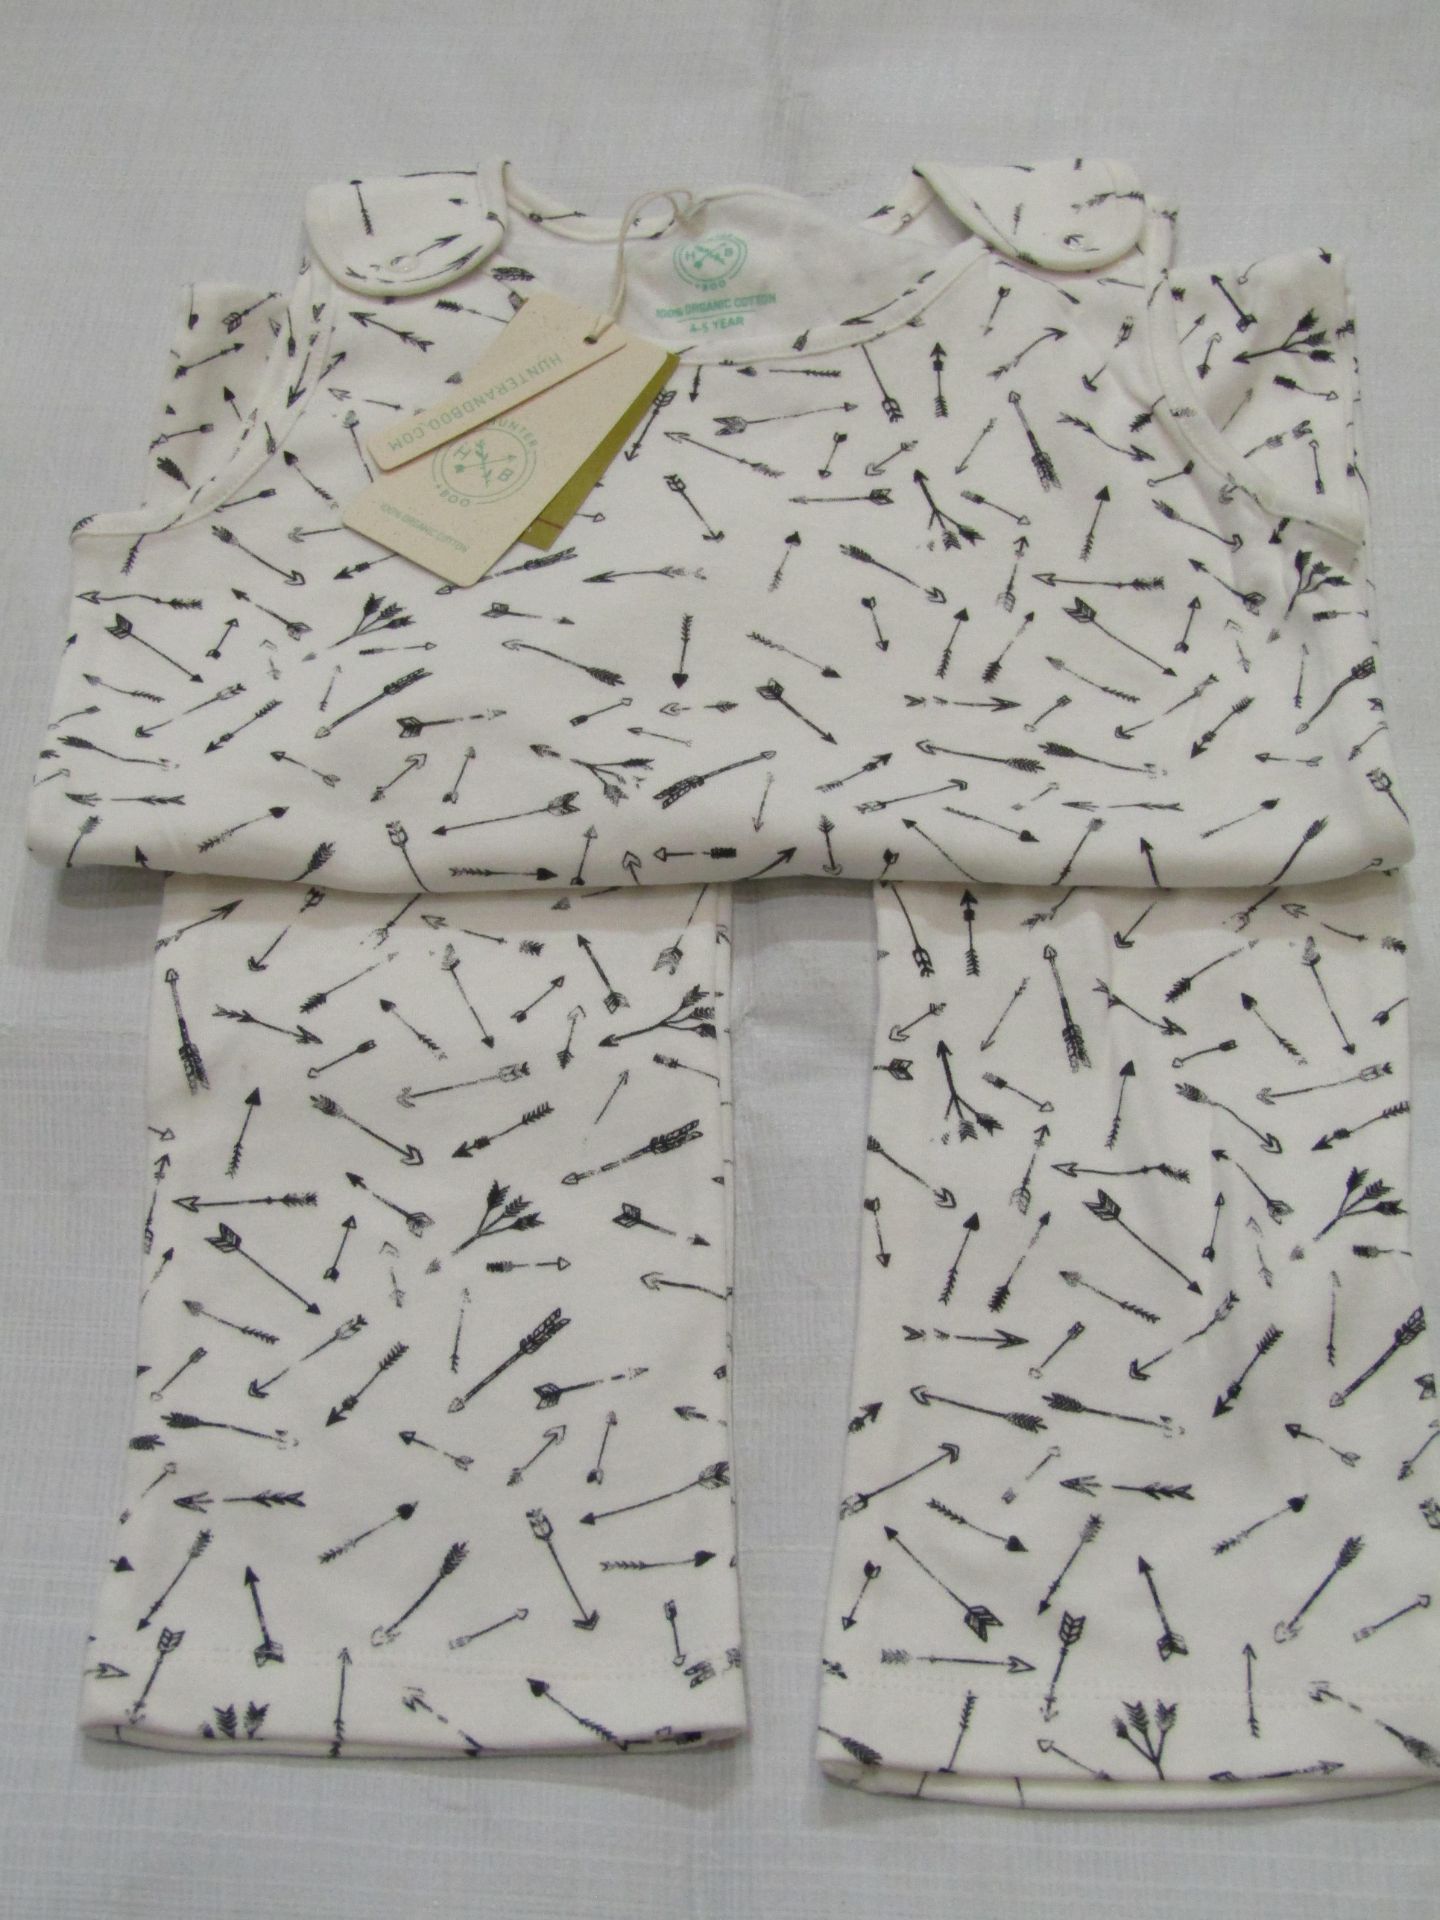 Hunter & Boo Arrow Print Jumpsuit Age 4-5yrs New & Packaged RRP £25 - Image 3 of 3